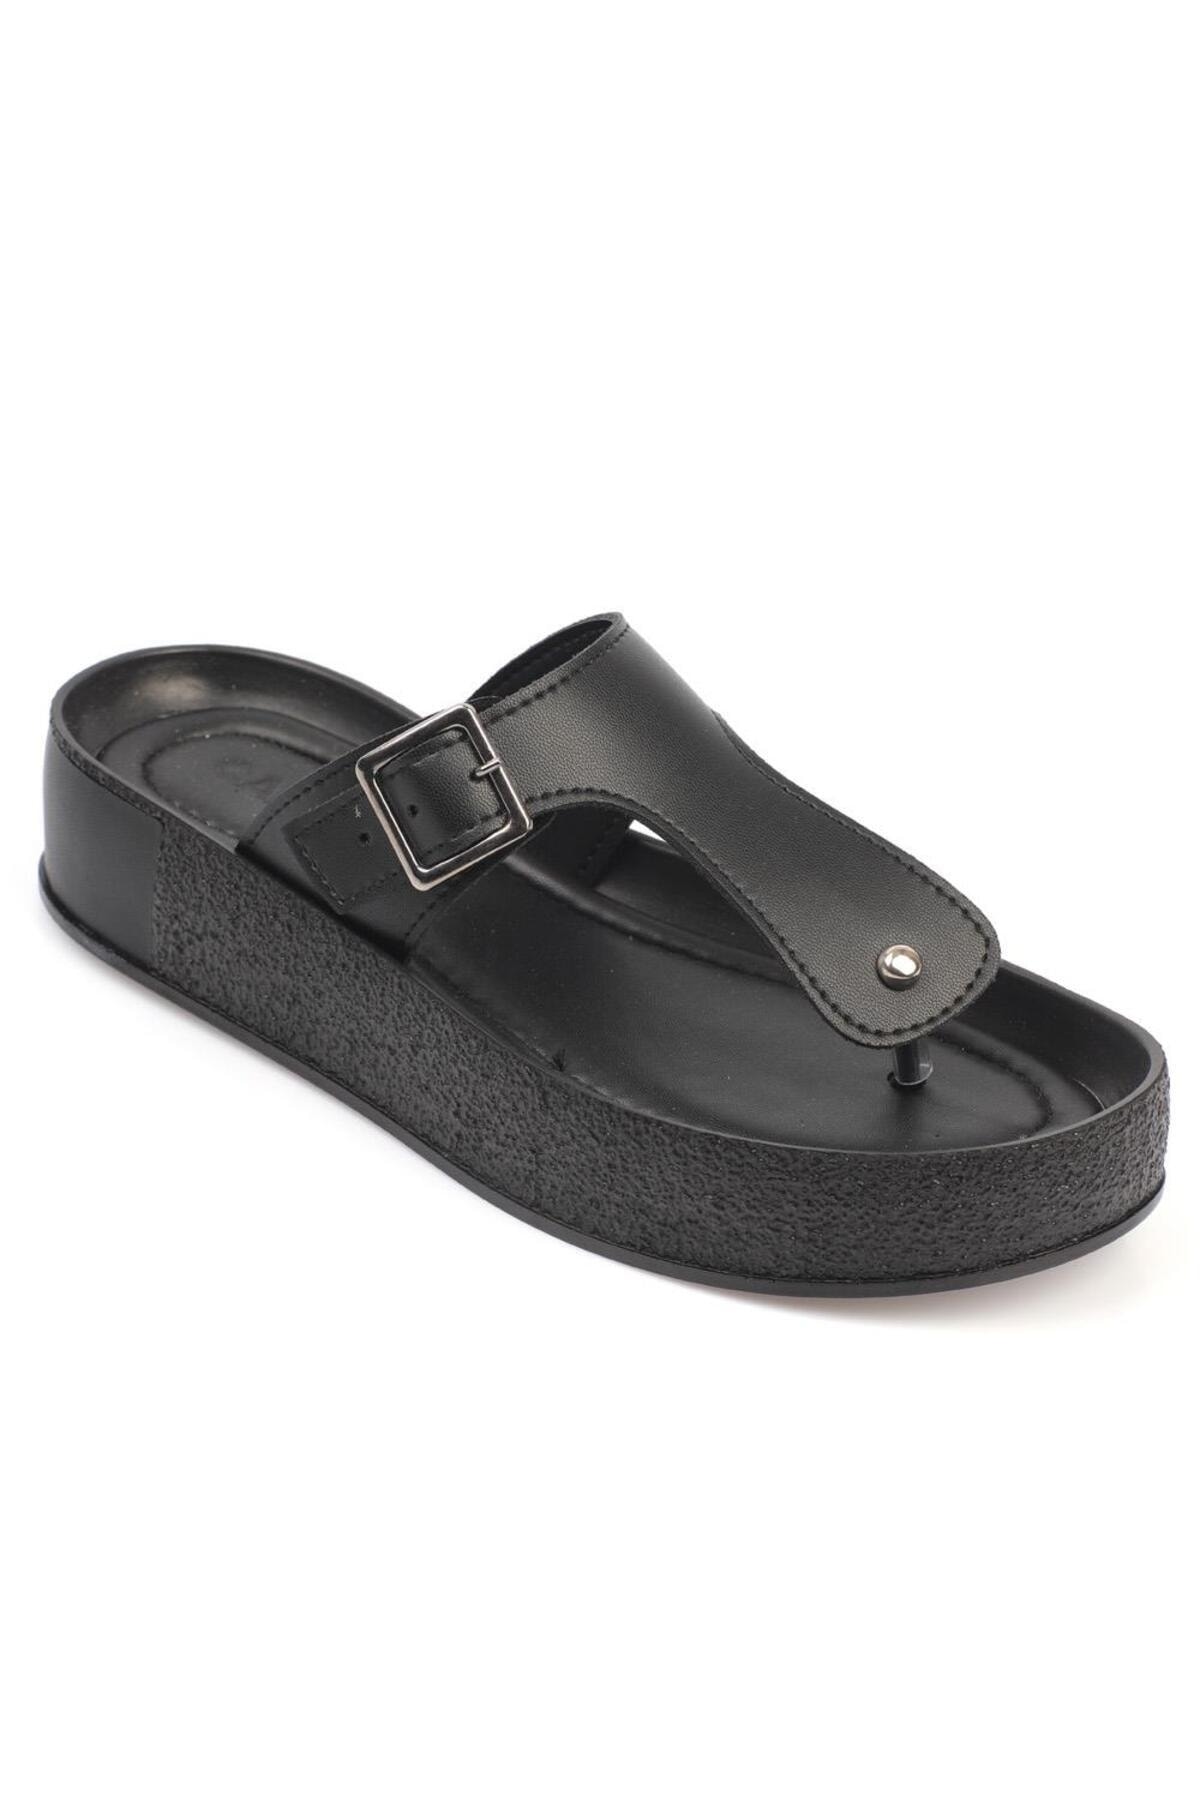 Levně Capone Outfitters Capone Flip-flop Belt Buckles Colorful Detailed Wedge Heel Women Black Women's Slippers.